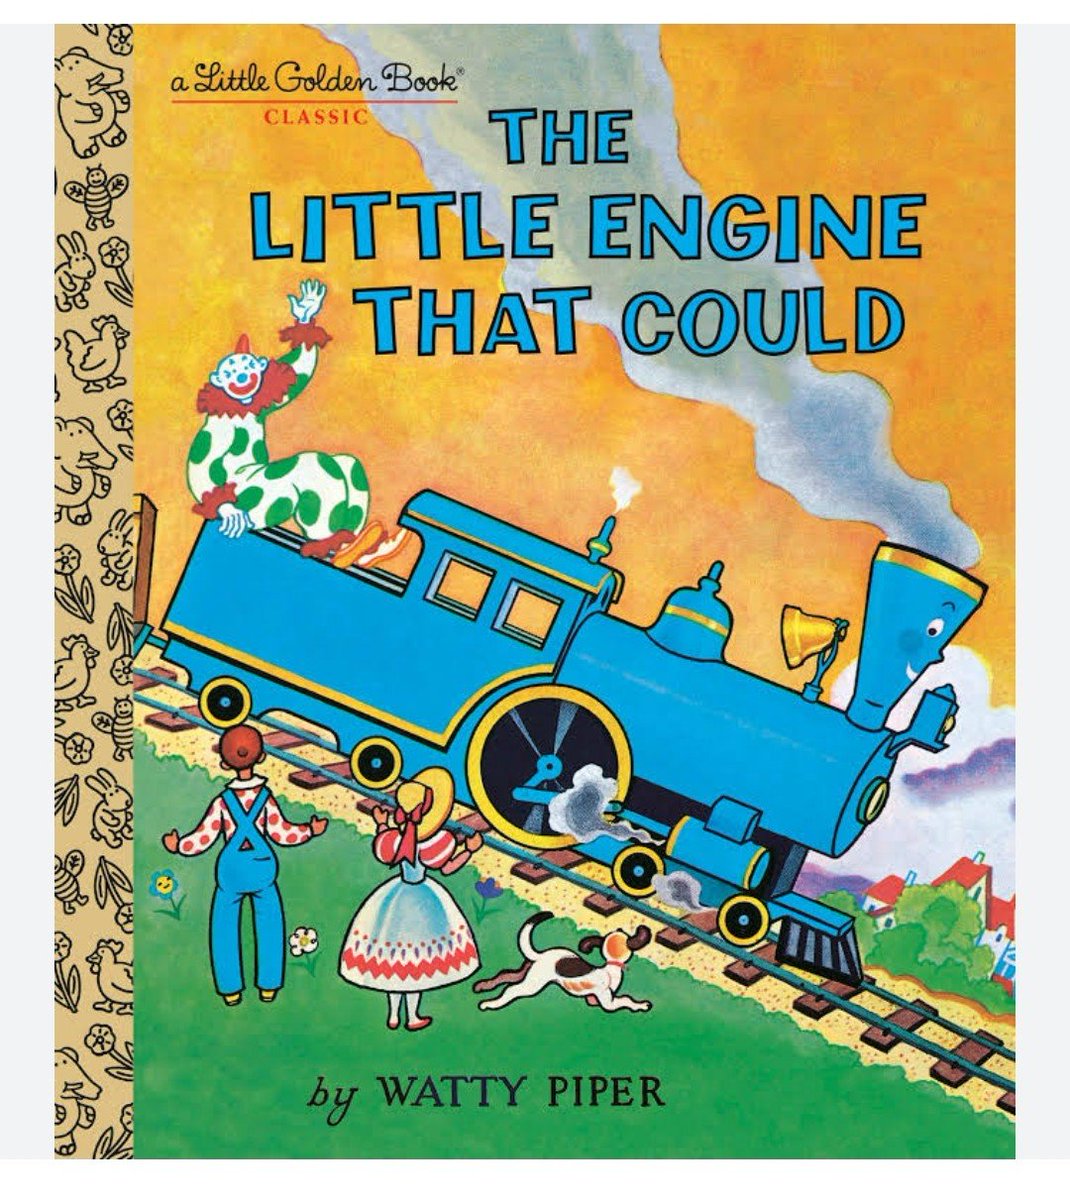 @MRogersWrites I'm #ChronicallyIll since childhood, & spent most times in dr's offices & hospitals. This book, before Thomas (creeped me out & I'm glad I never got into it), really instilled in me to keep going, in spite of my limitations. & I liked that the Little Engine was a GIRL.